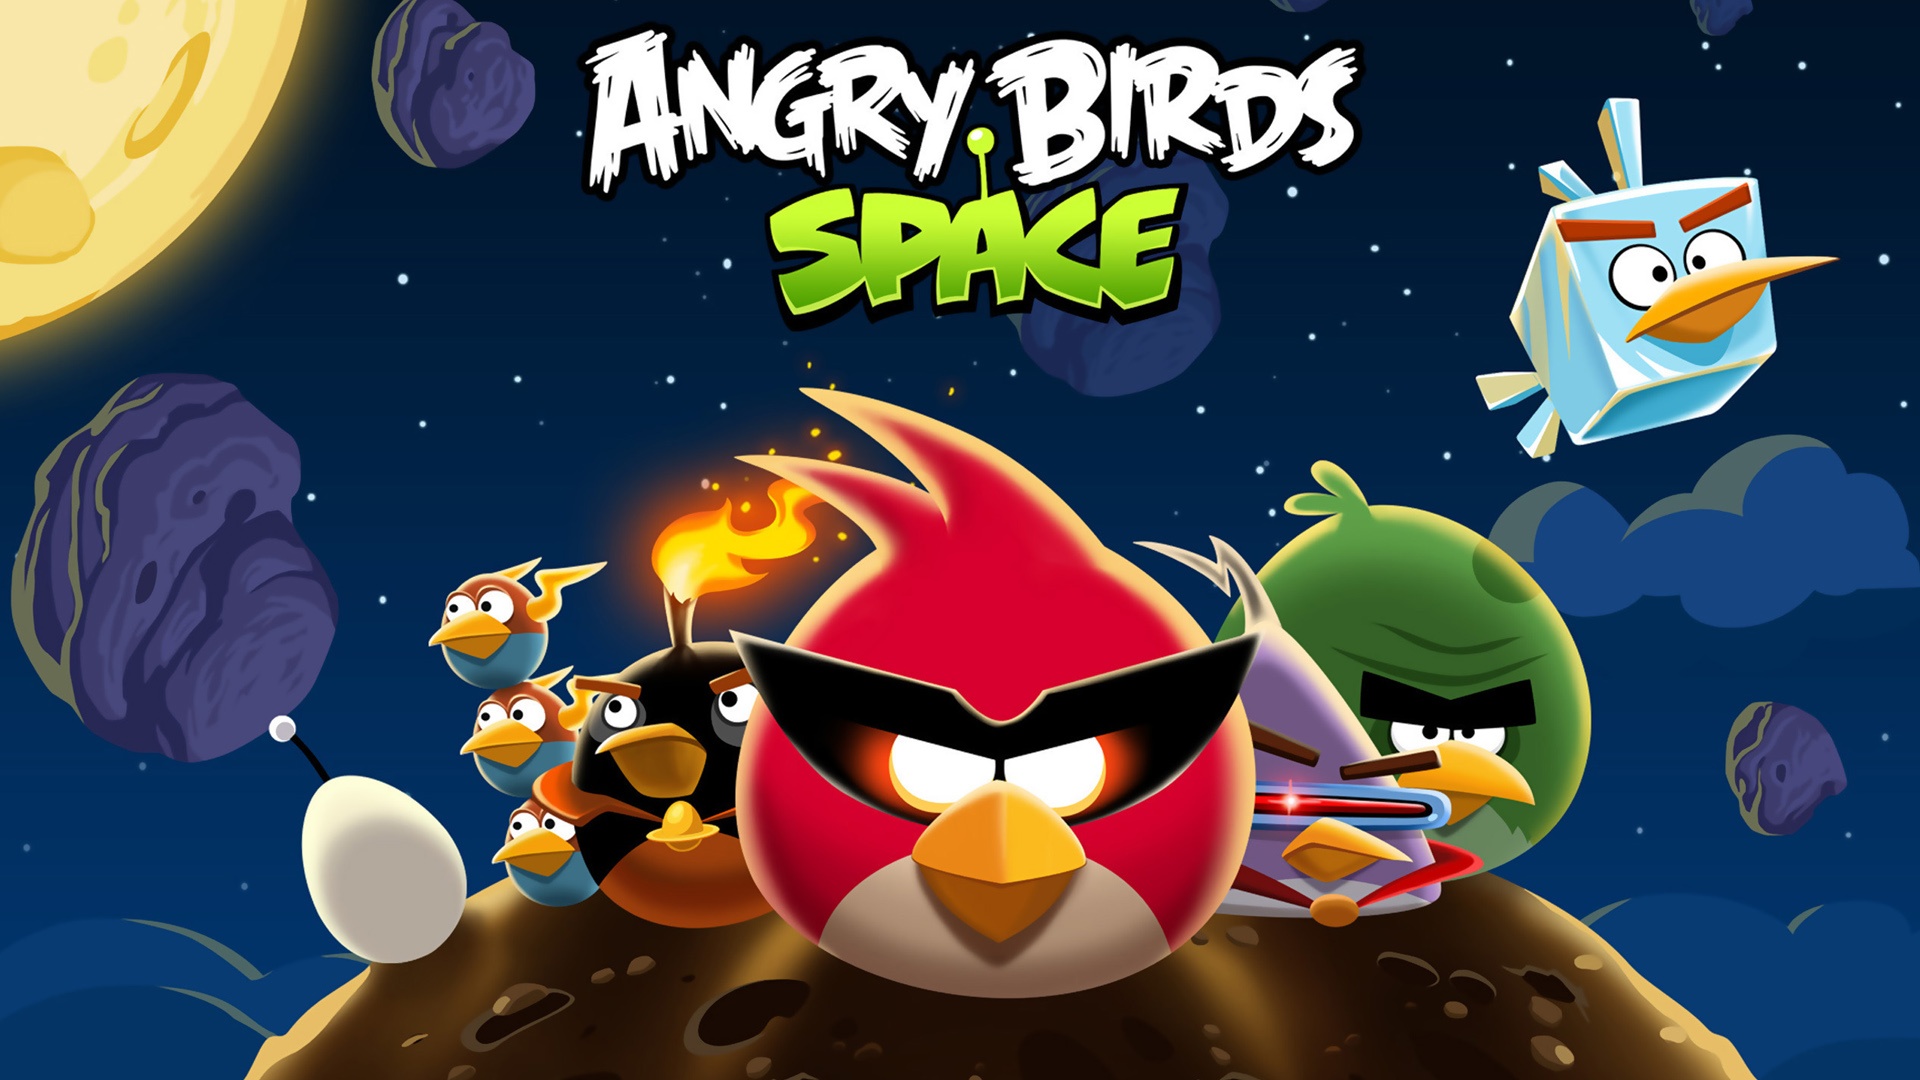 PC Wallpapers angry birds, angry birds space, video game